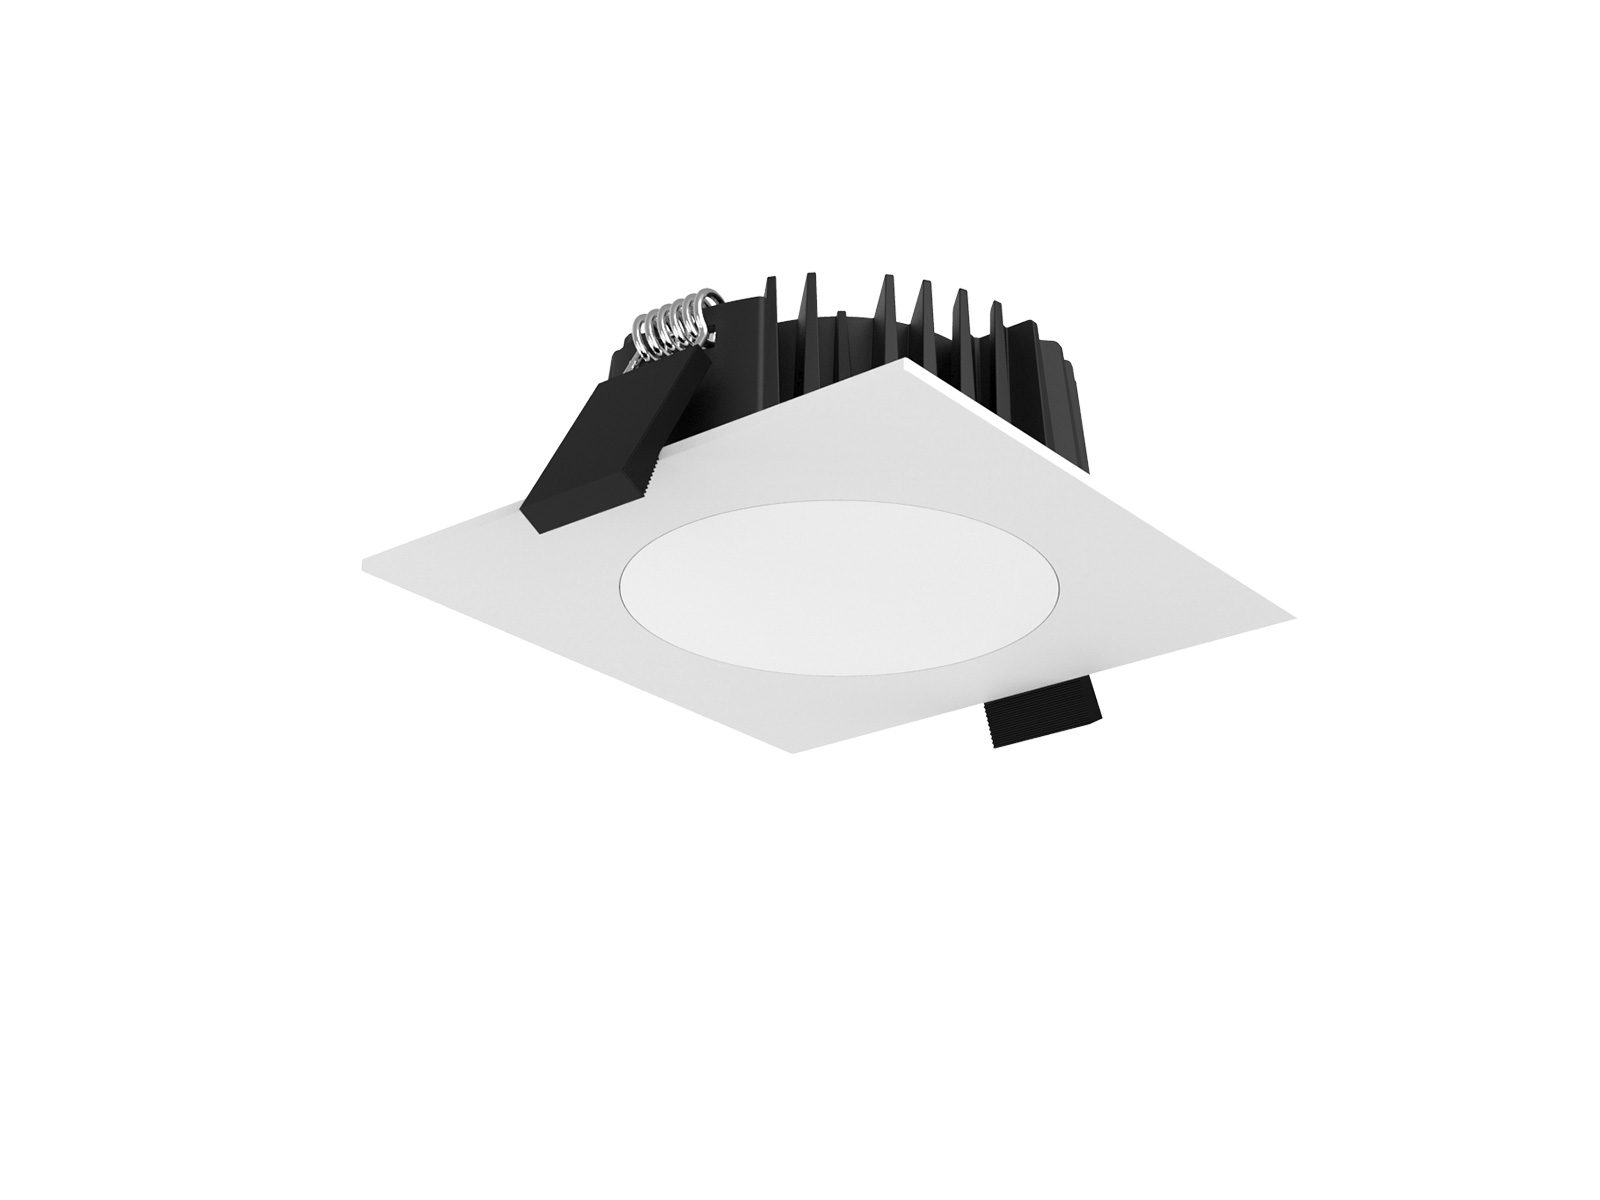 DL147 fire rated ceiling downlights